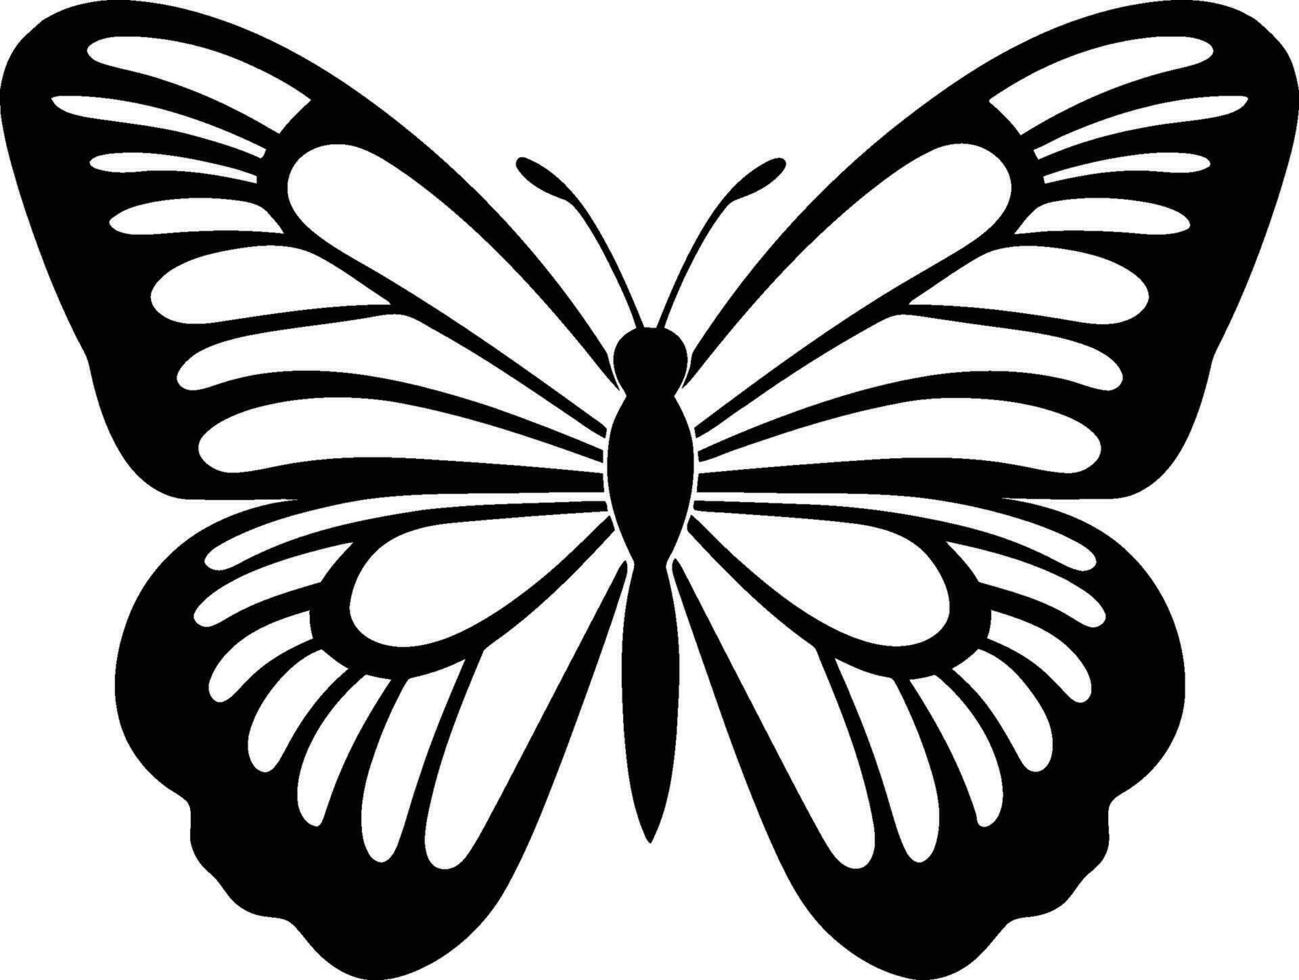 Crafted in Black Butterfly Icon Sleek and Stylish Noir Butterfly Design vector